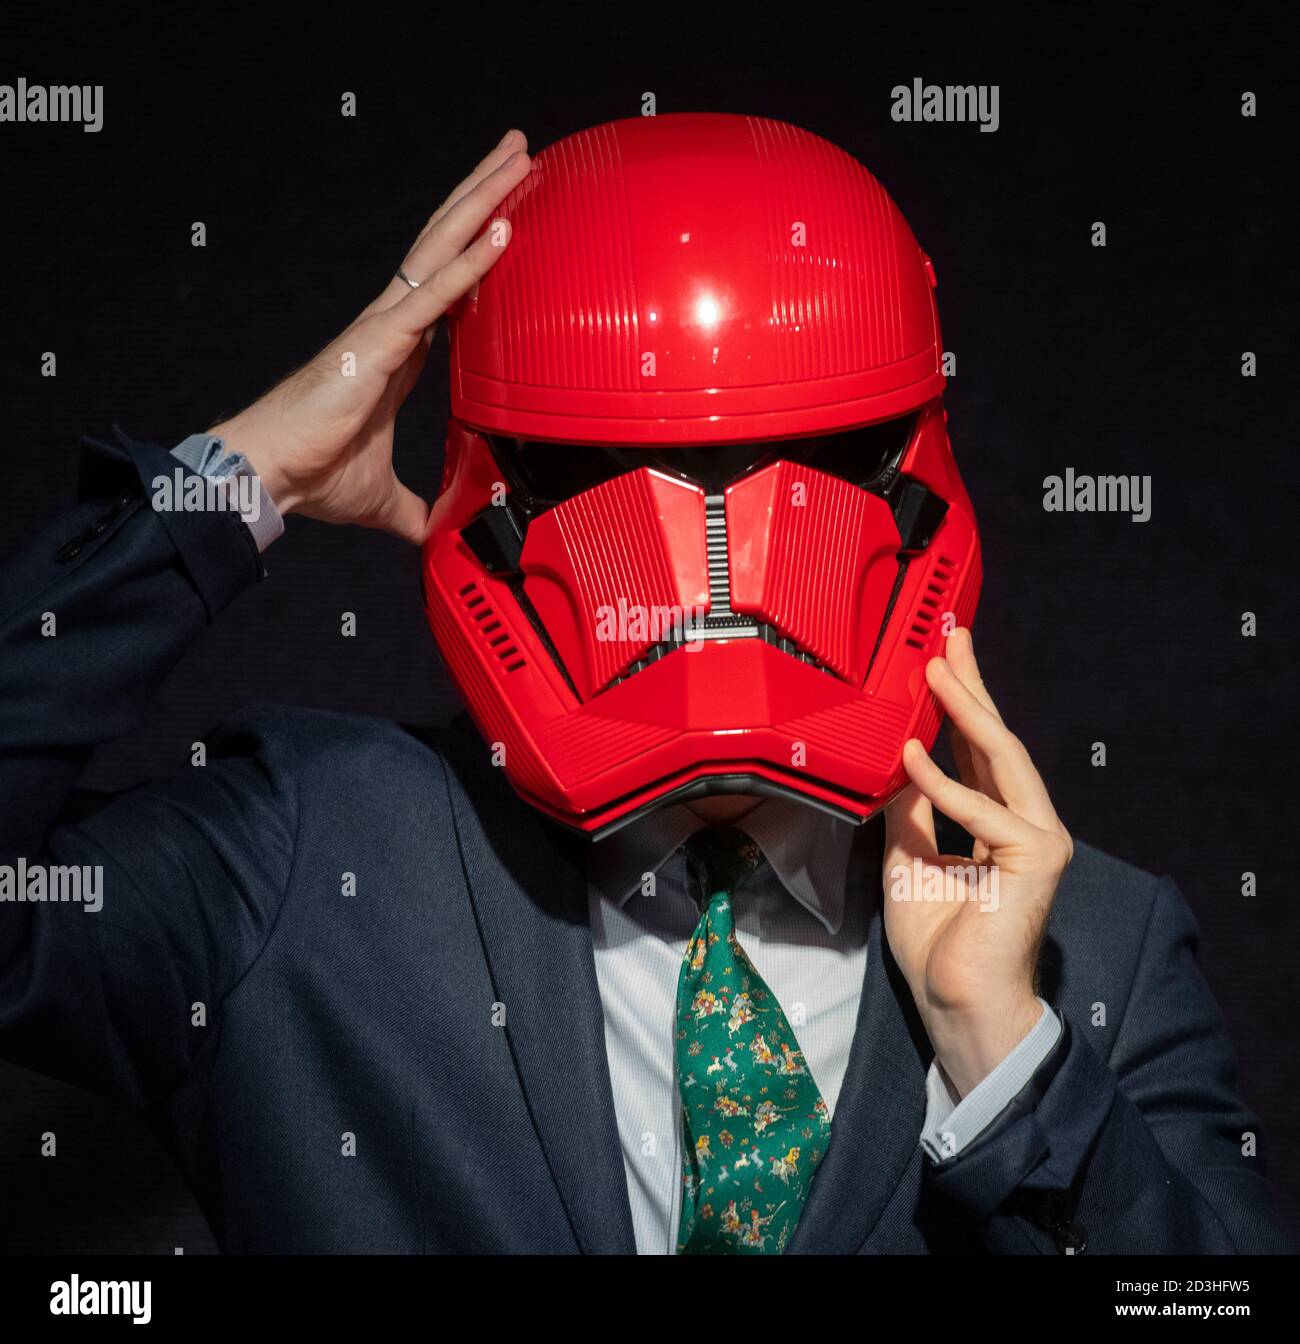 Bonhams, Knightsbridge, London, UK. 8 October 2020. Bonhams’ Entertainment Memorabilia sale includes a rare, screen-used Sith Trooper Helmet from Star Wars: The Rise Of Skywalker (2019), kindly donated to BAFTA’s year-round charitable activity by Lucasfilm. The helmet was created by BAFTA award-winning costume designer Michael Kaplan in a striking red colour, distinguishing the new stormtroopers from the classic, white-armoured forces beloved by previous generations. It has an estimate of £20,000-30,000. Credit: Malcolm Park/Alamy Stock Photo